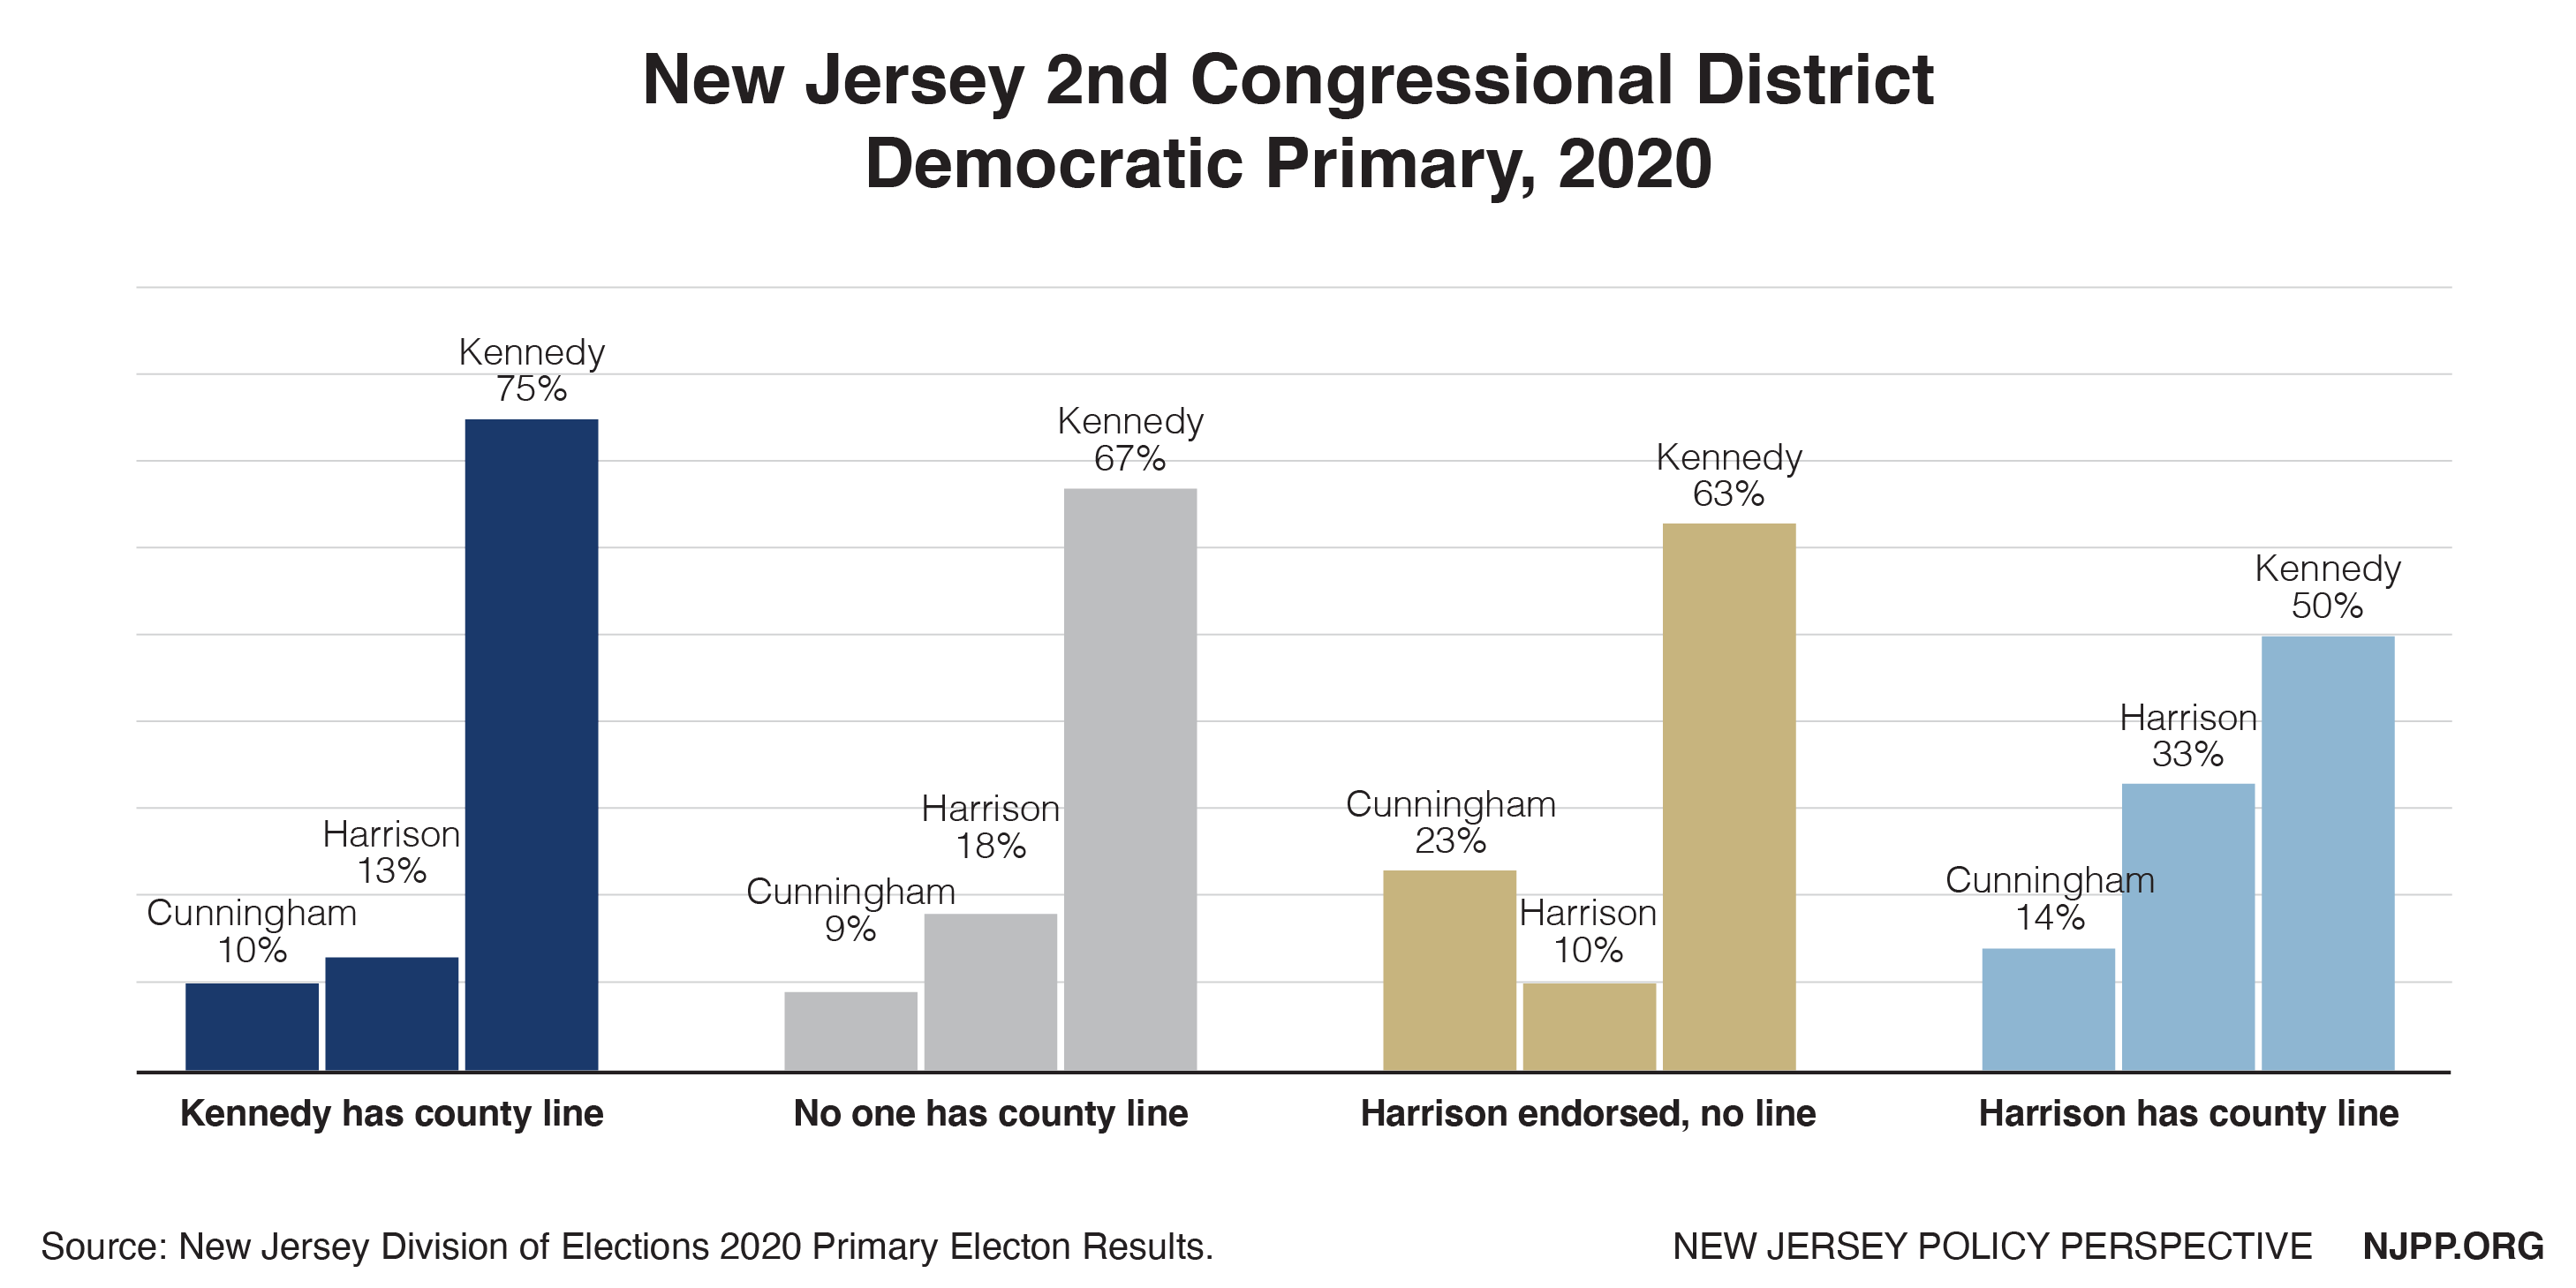 Figure 2: 2nd Congressional District Democratic Primary. Does not include Francis and Turkavage, who received < 3% of the vote.